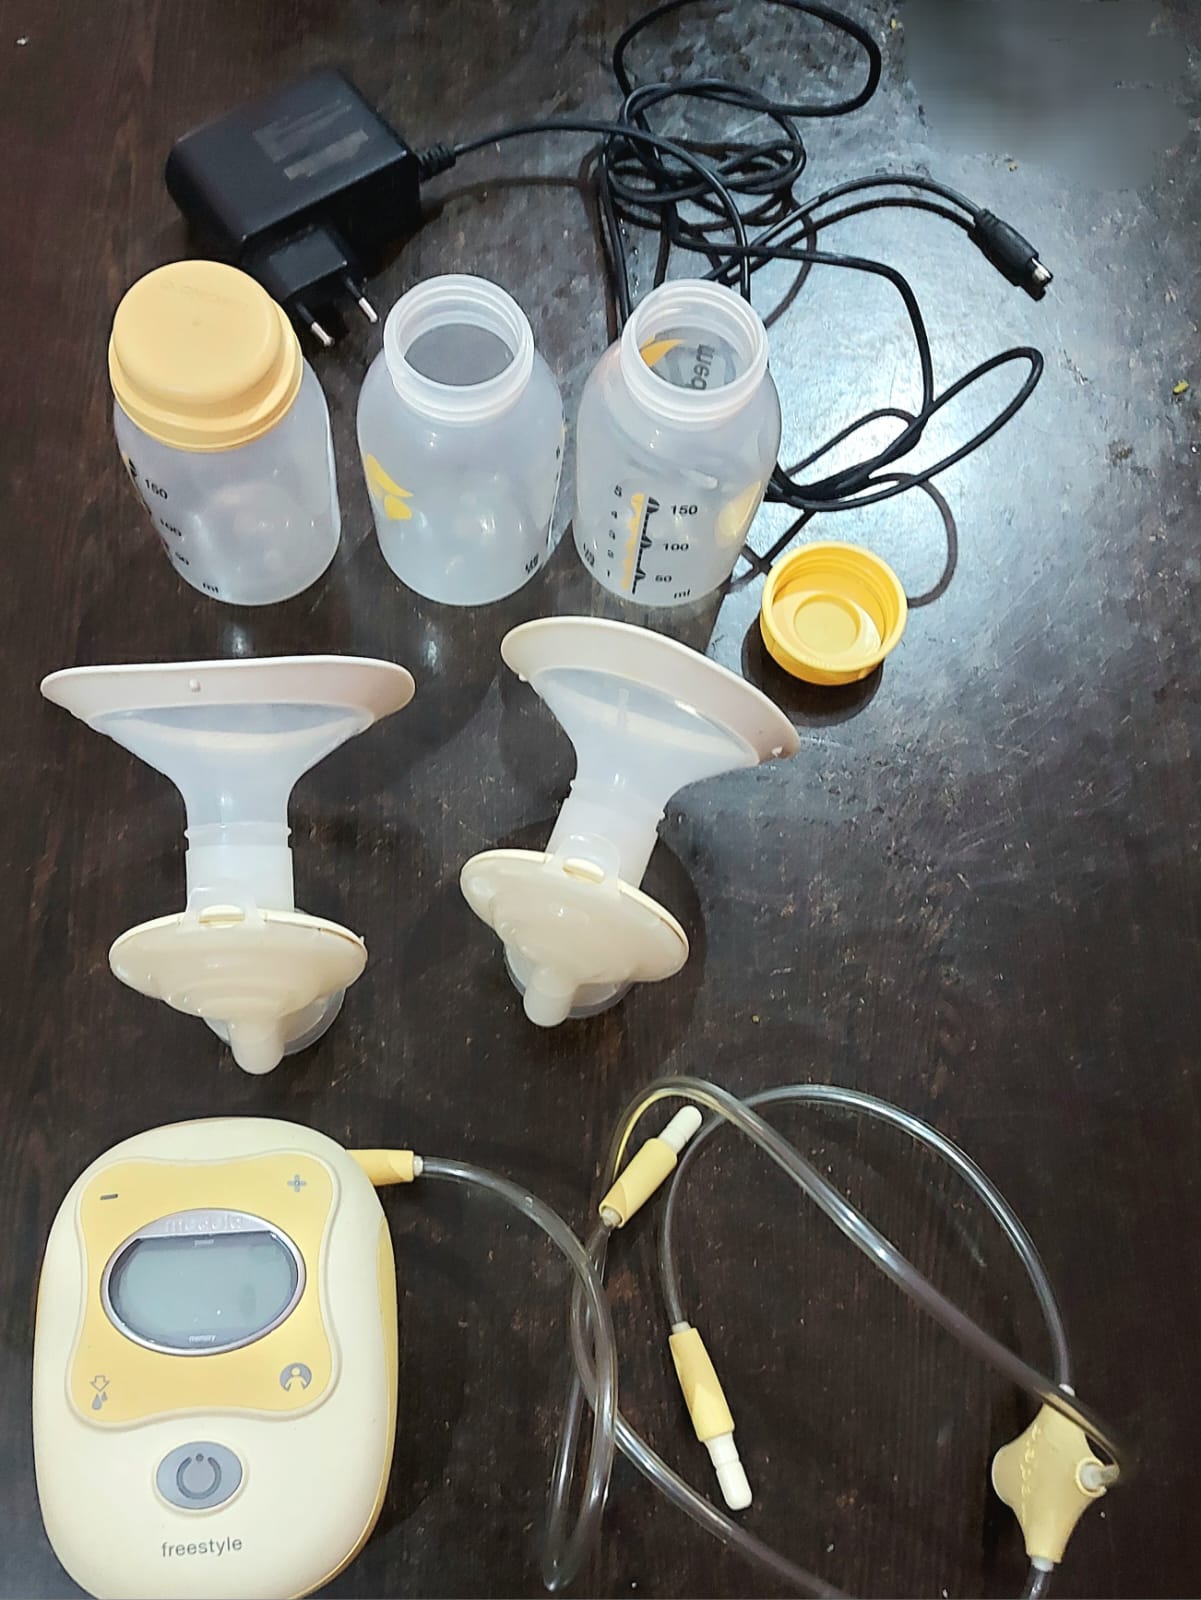 Medela Freestyle Double Electric Breast Pump – Uptot